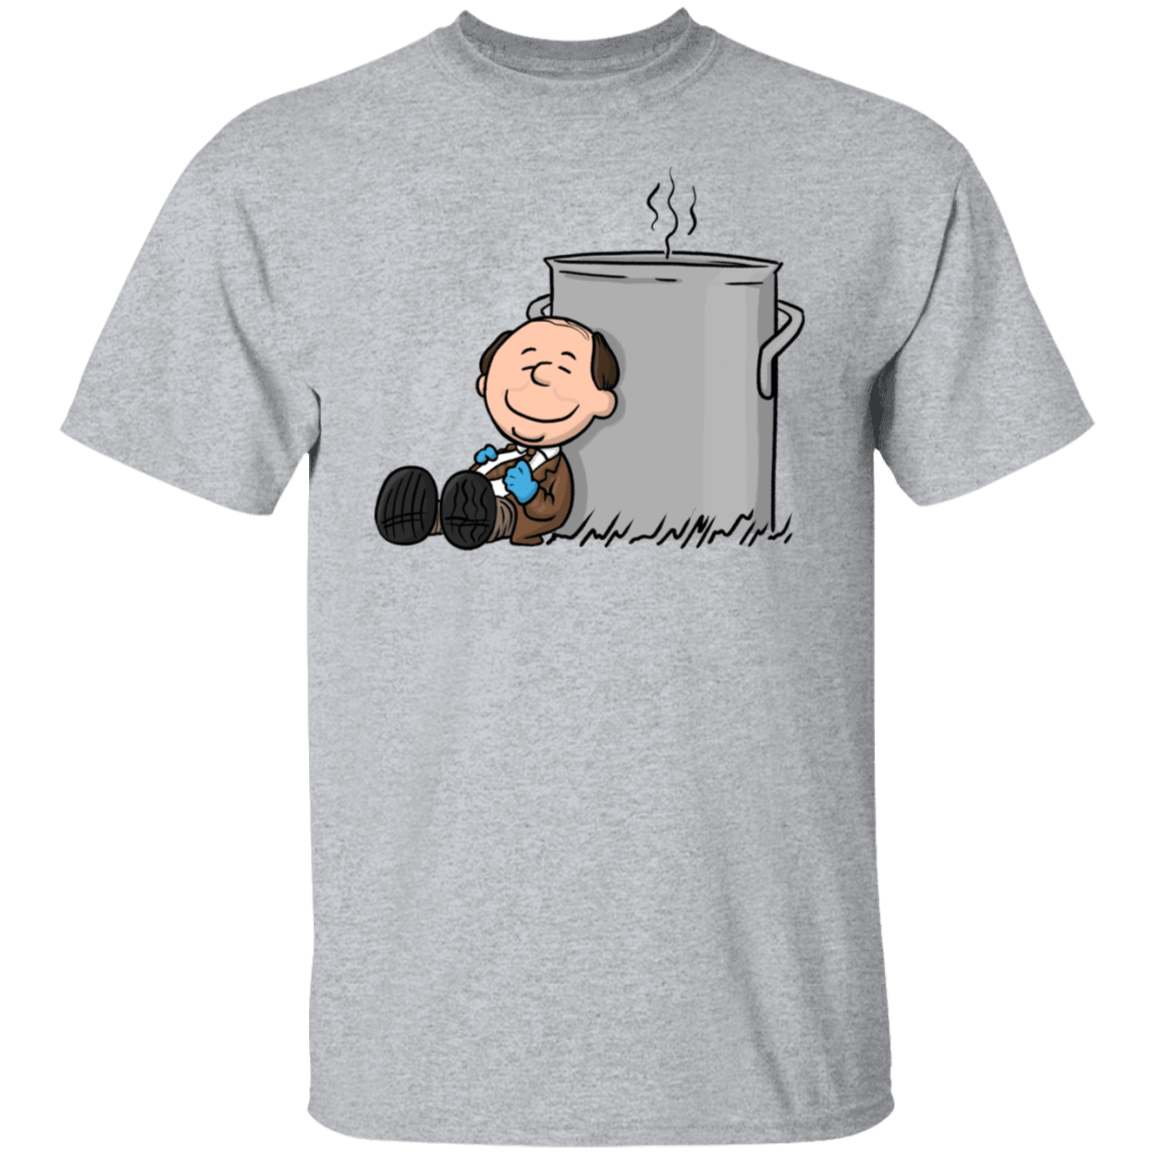 T-Shirts Sport Grey / S Chilly Brown T-Shirt